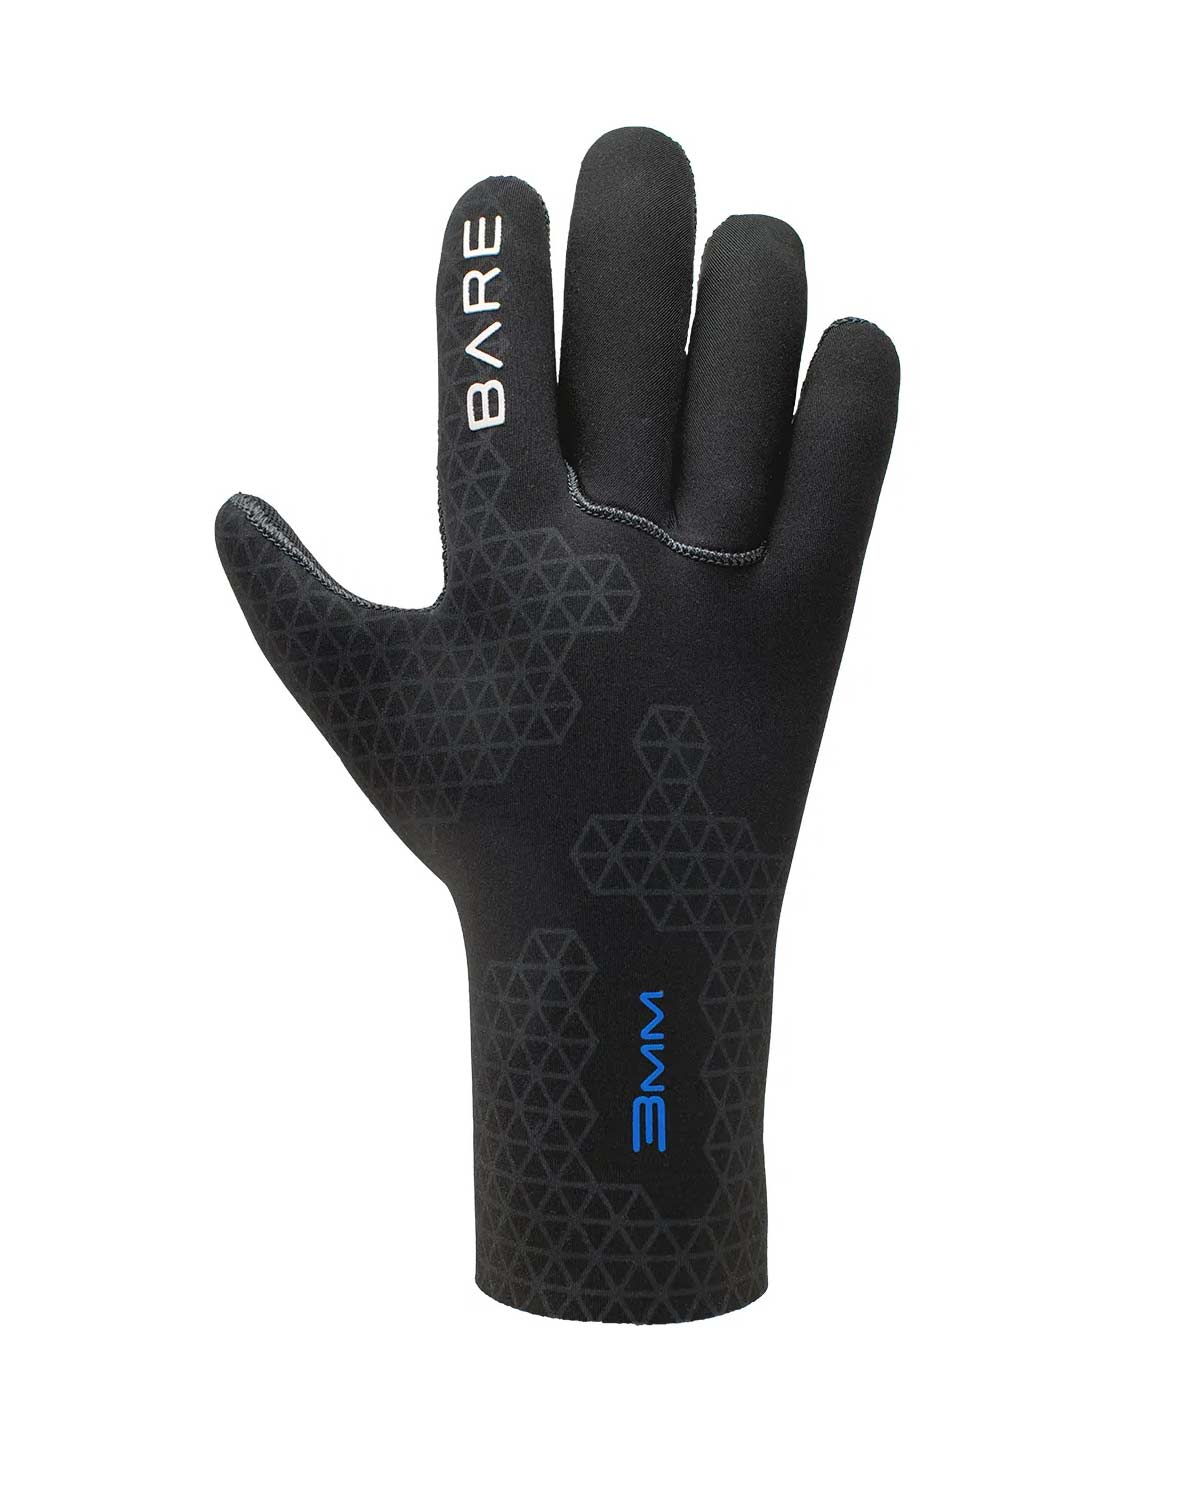 3mm BARE Wetsuit Gloves